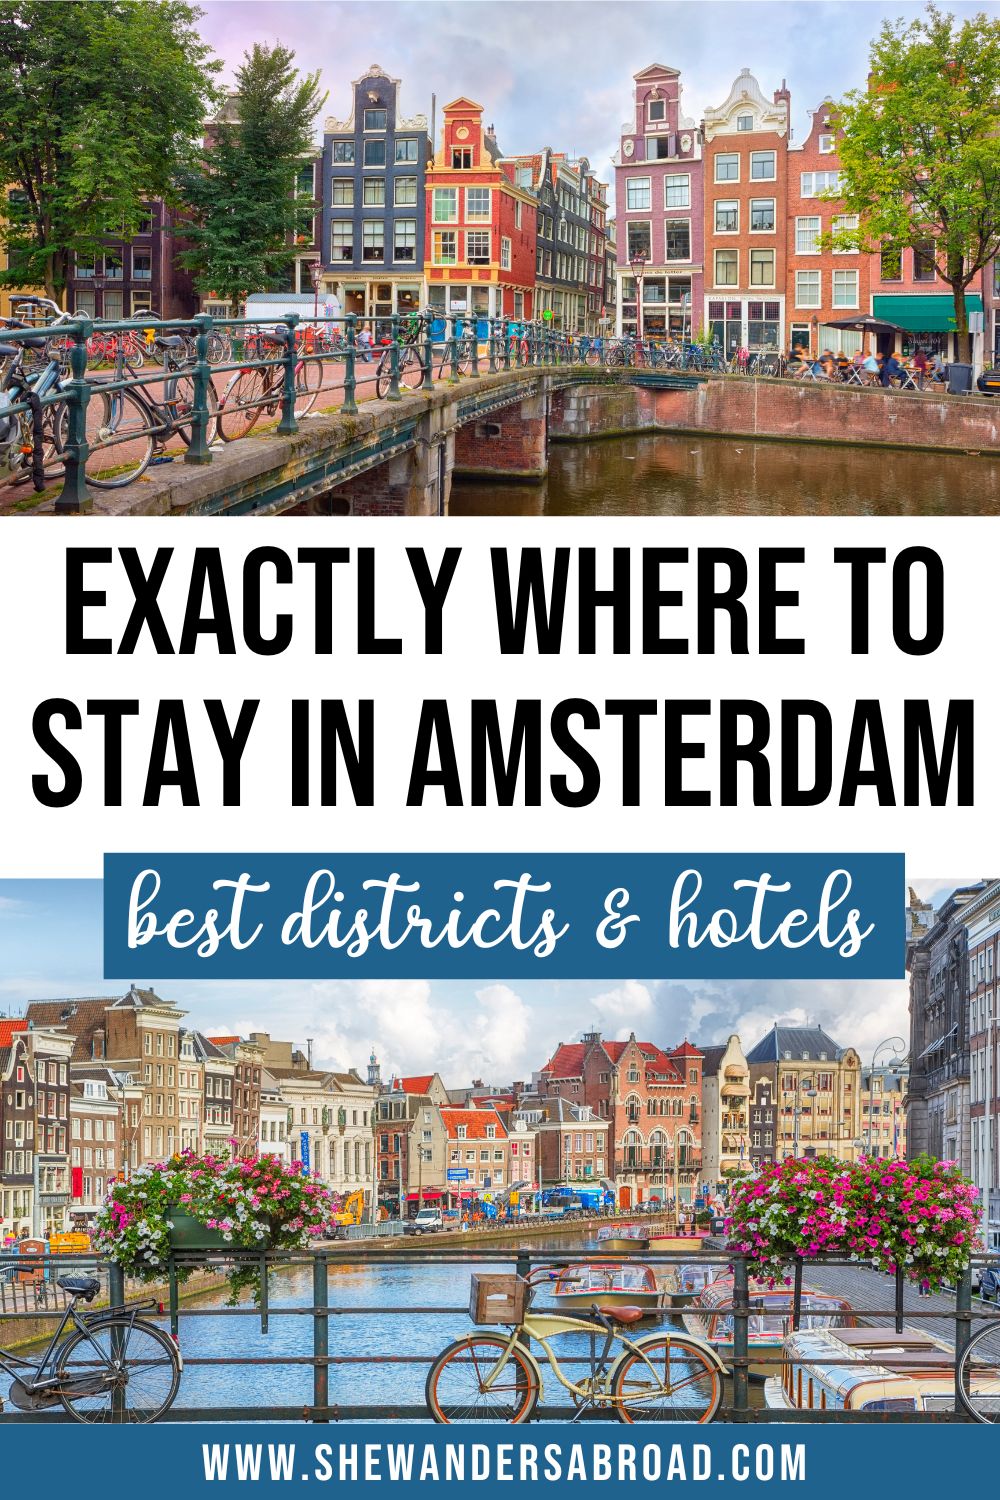 Where to Stay in Amsterdam: 10 Best Areas & Hotels